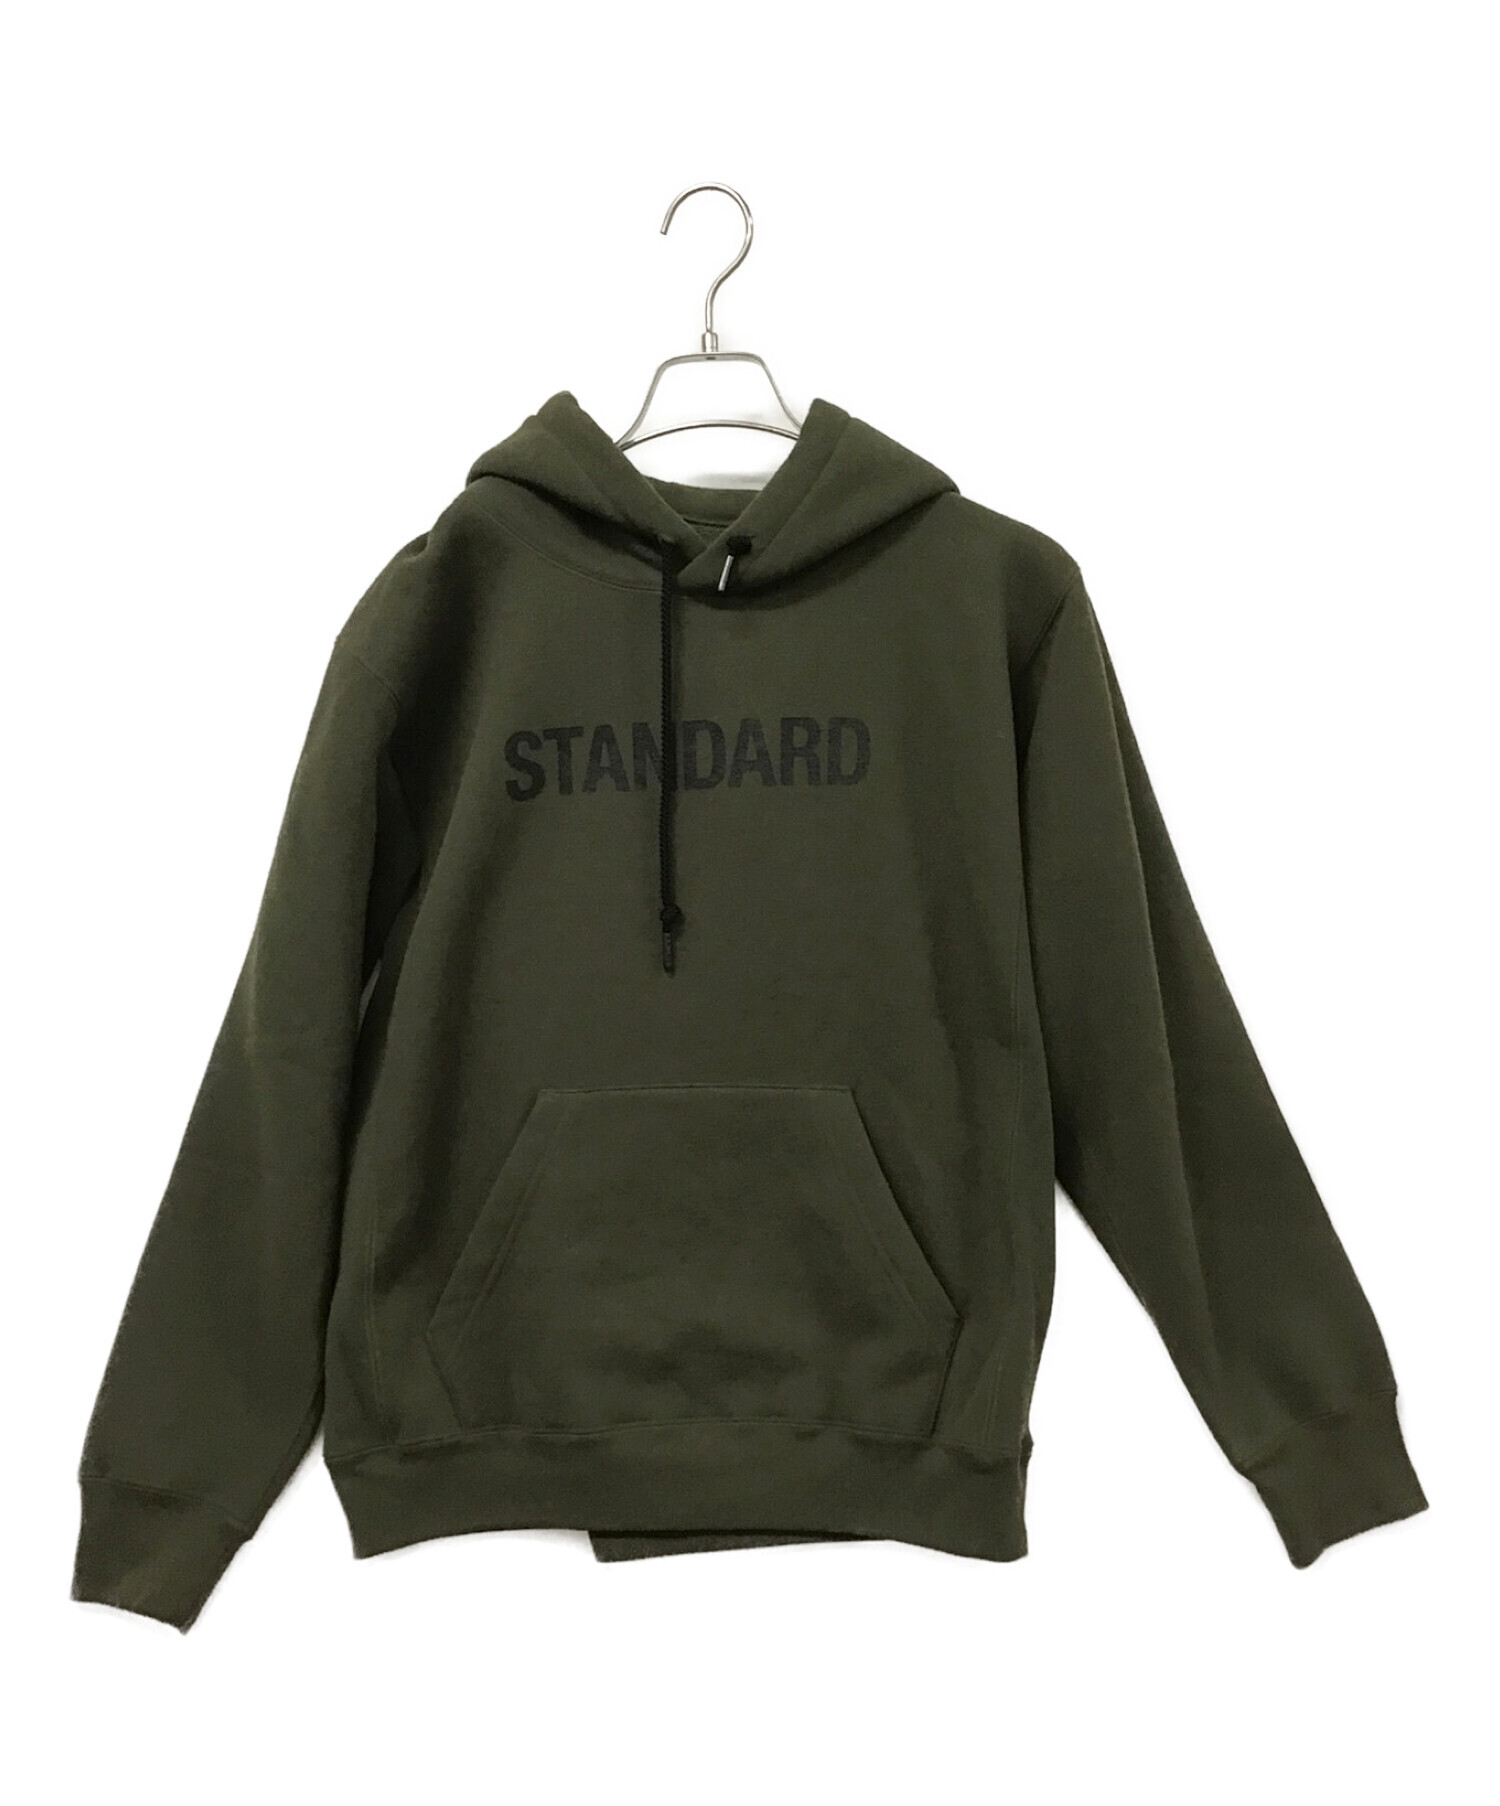 THE NORTH FACE M Standard Hoodie